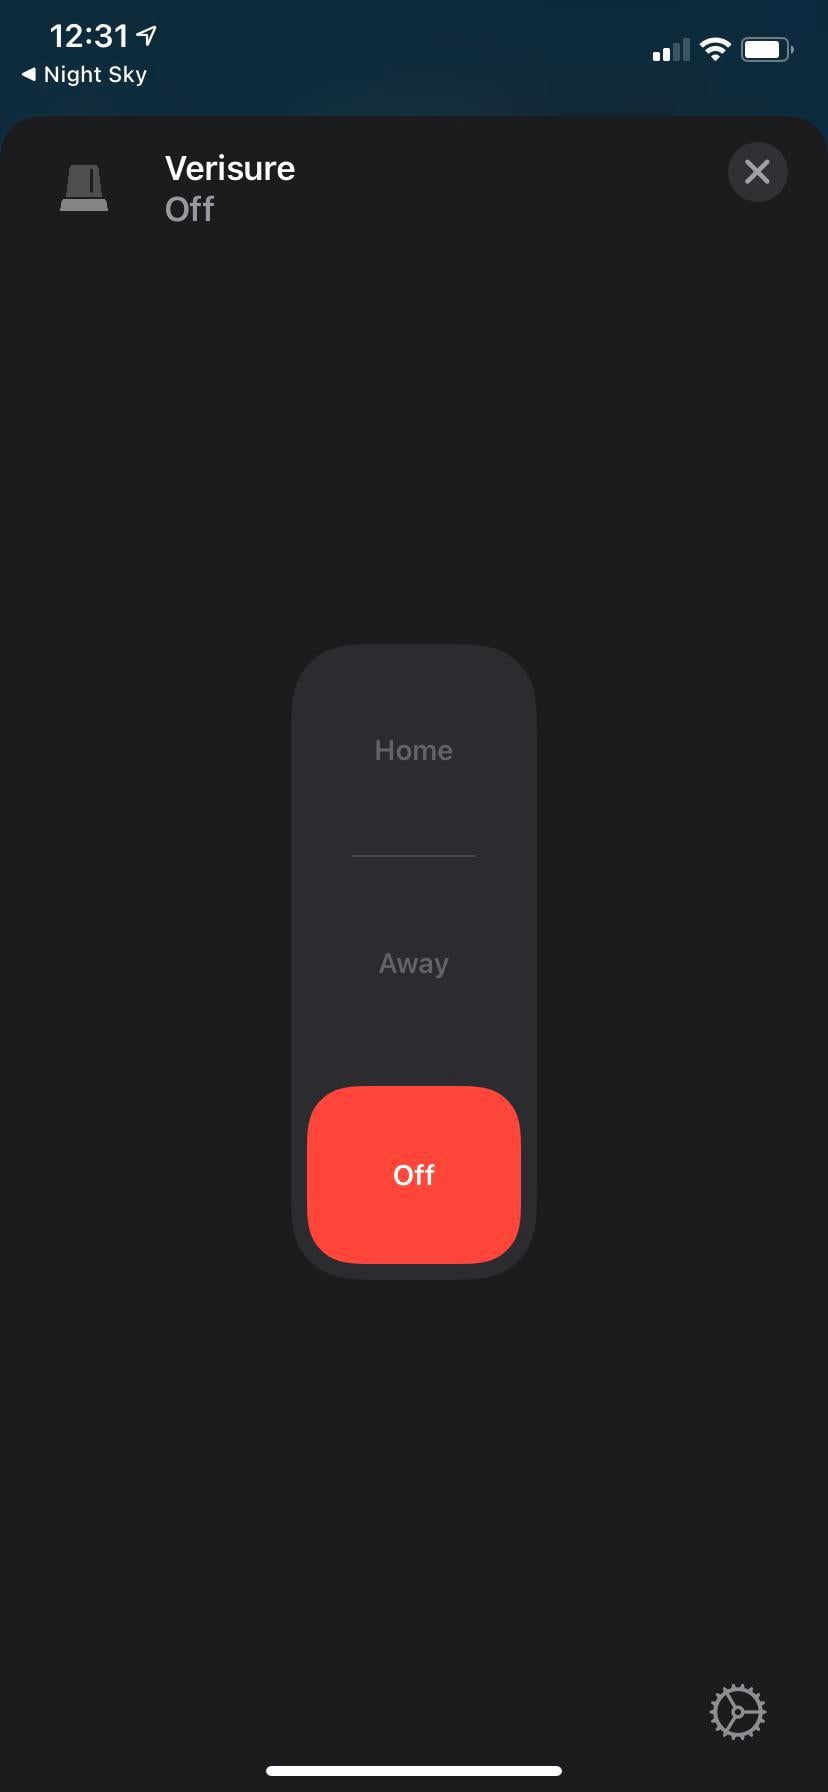 How can I activate the alarm with Siri without a